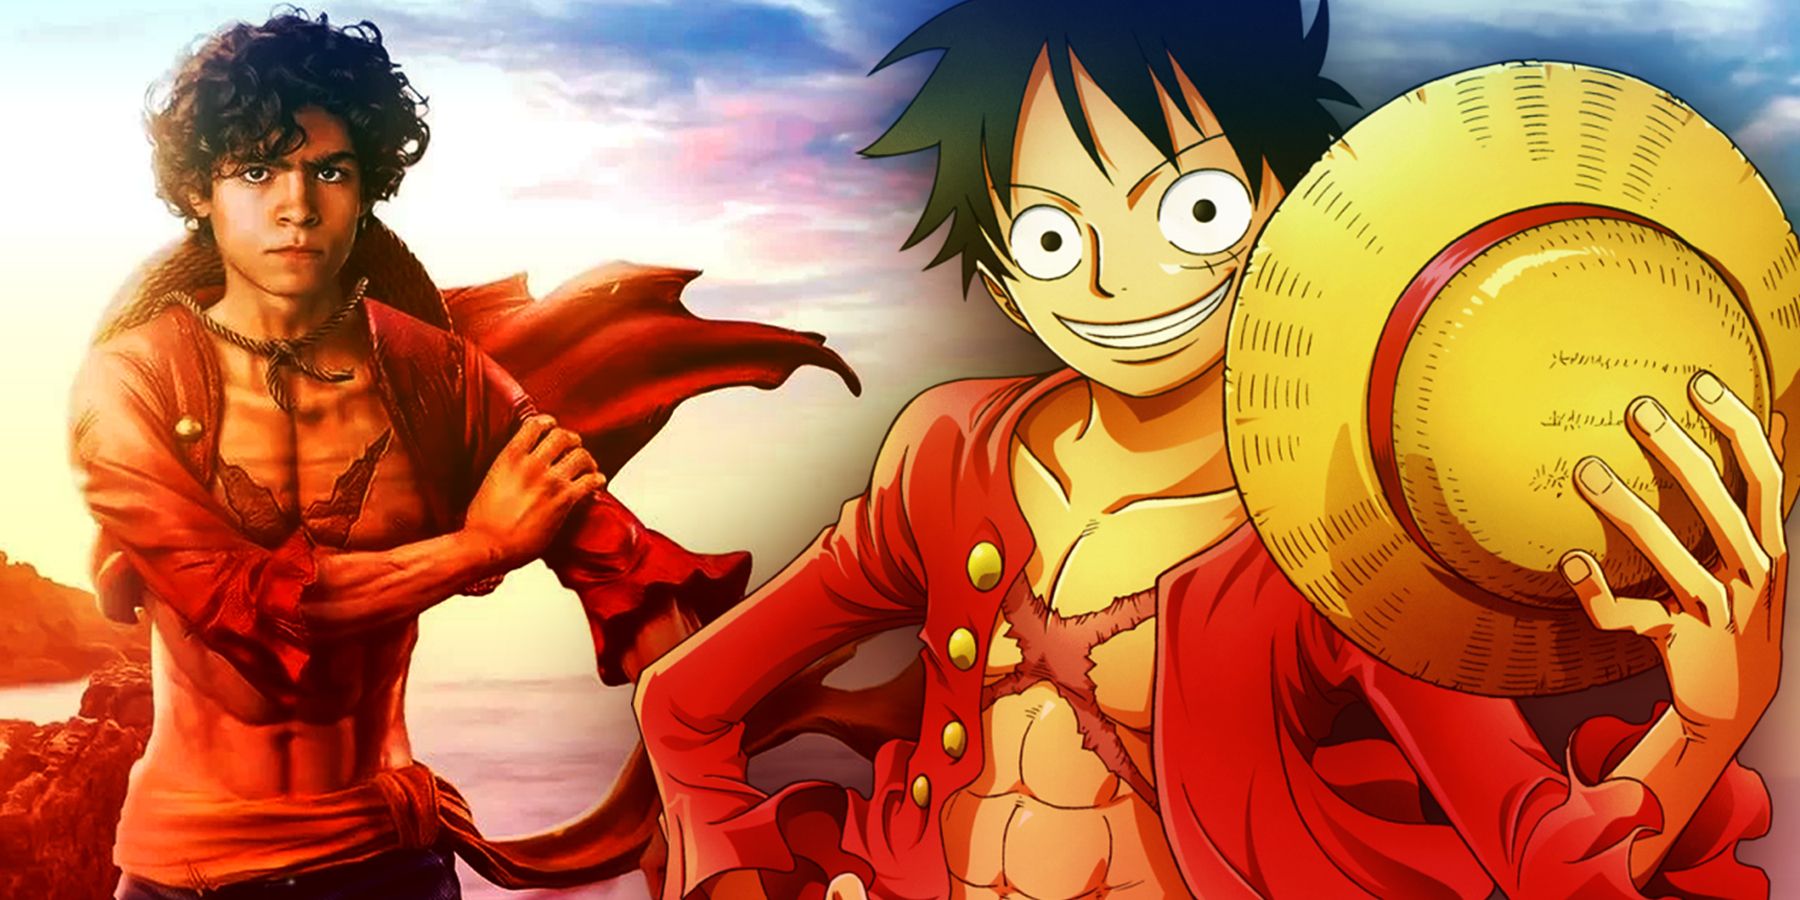 Dien vien Anime One Piece tham gia Live Action long tieng